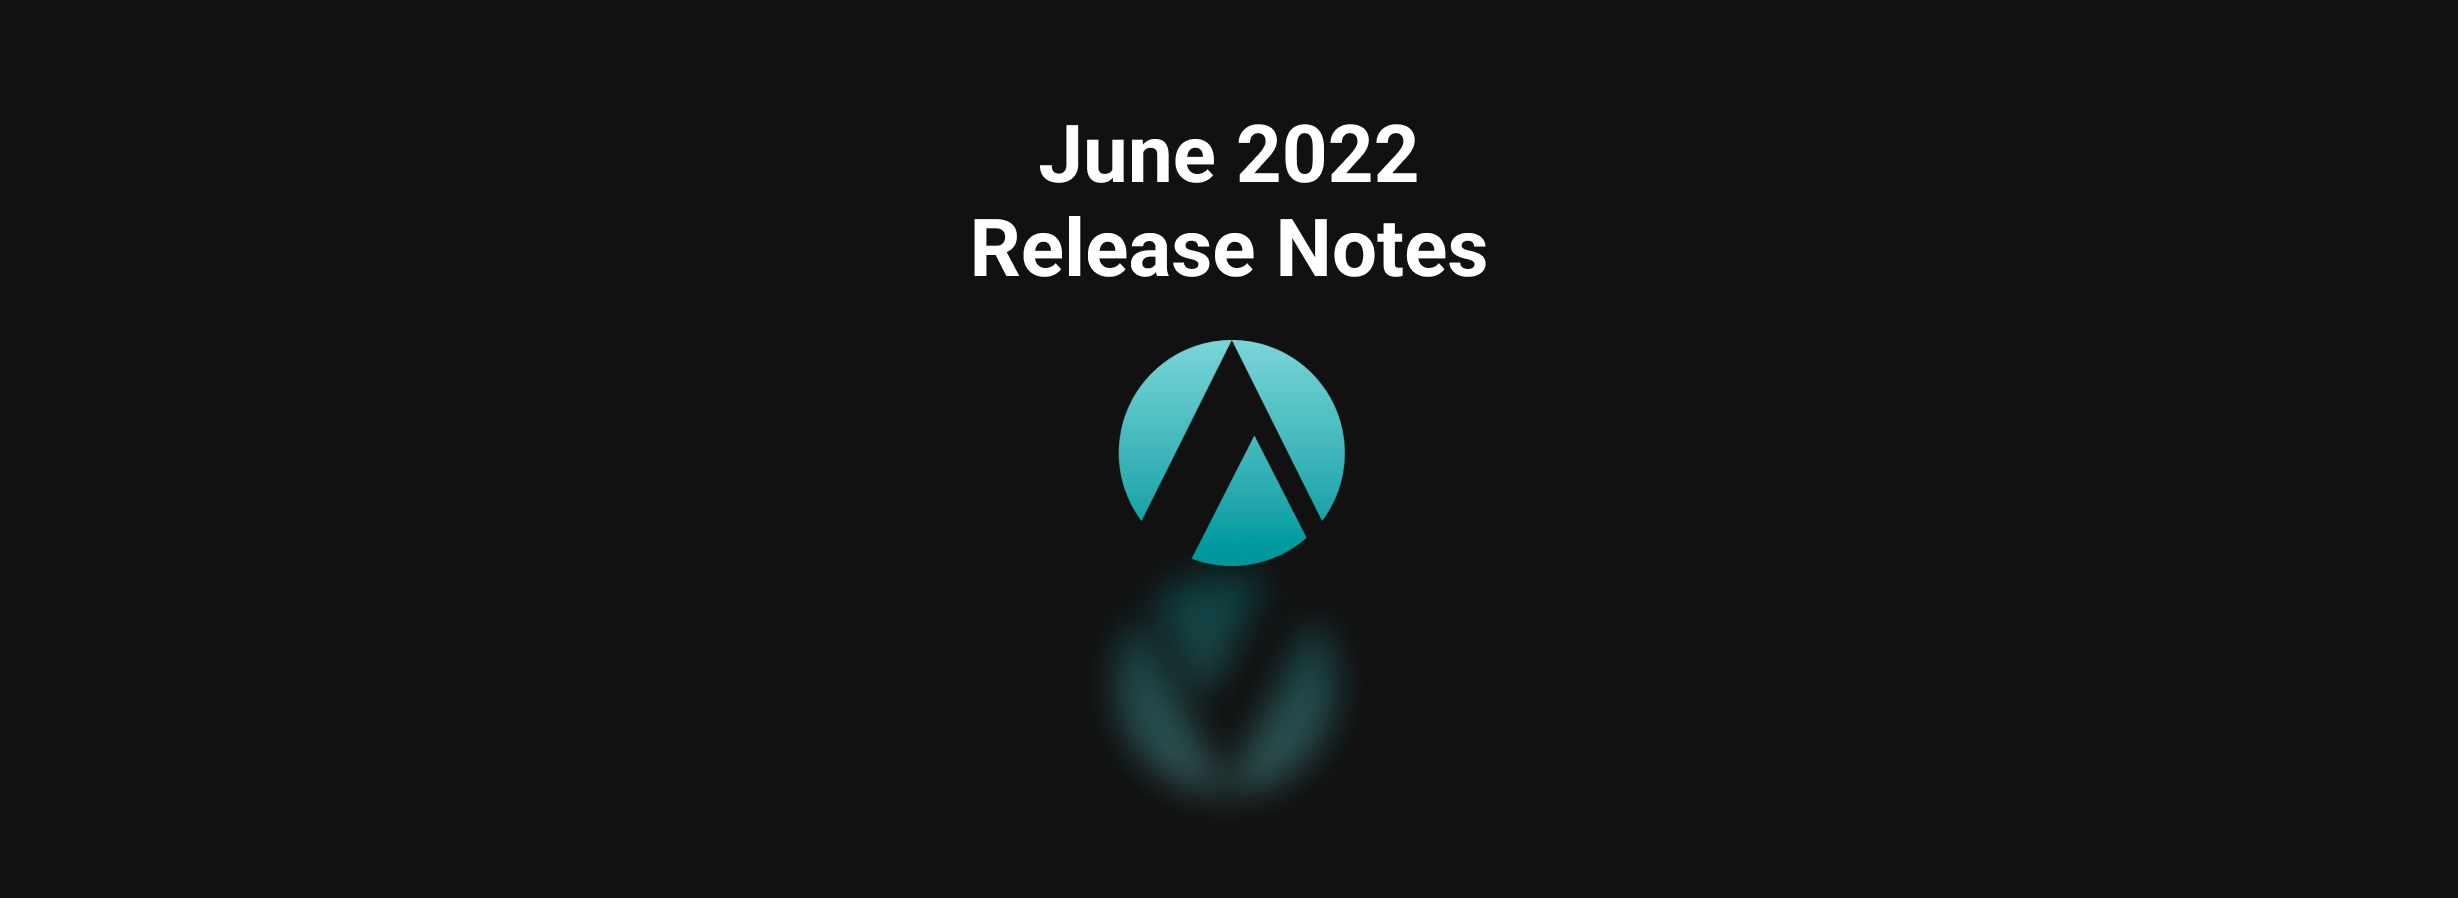 Aserto Console: June 2022 Release Notes